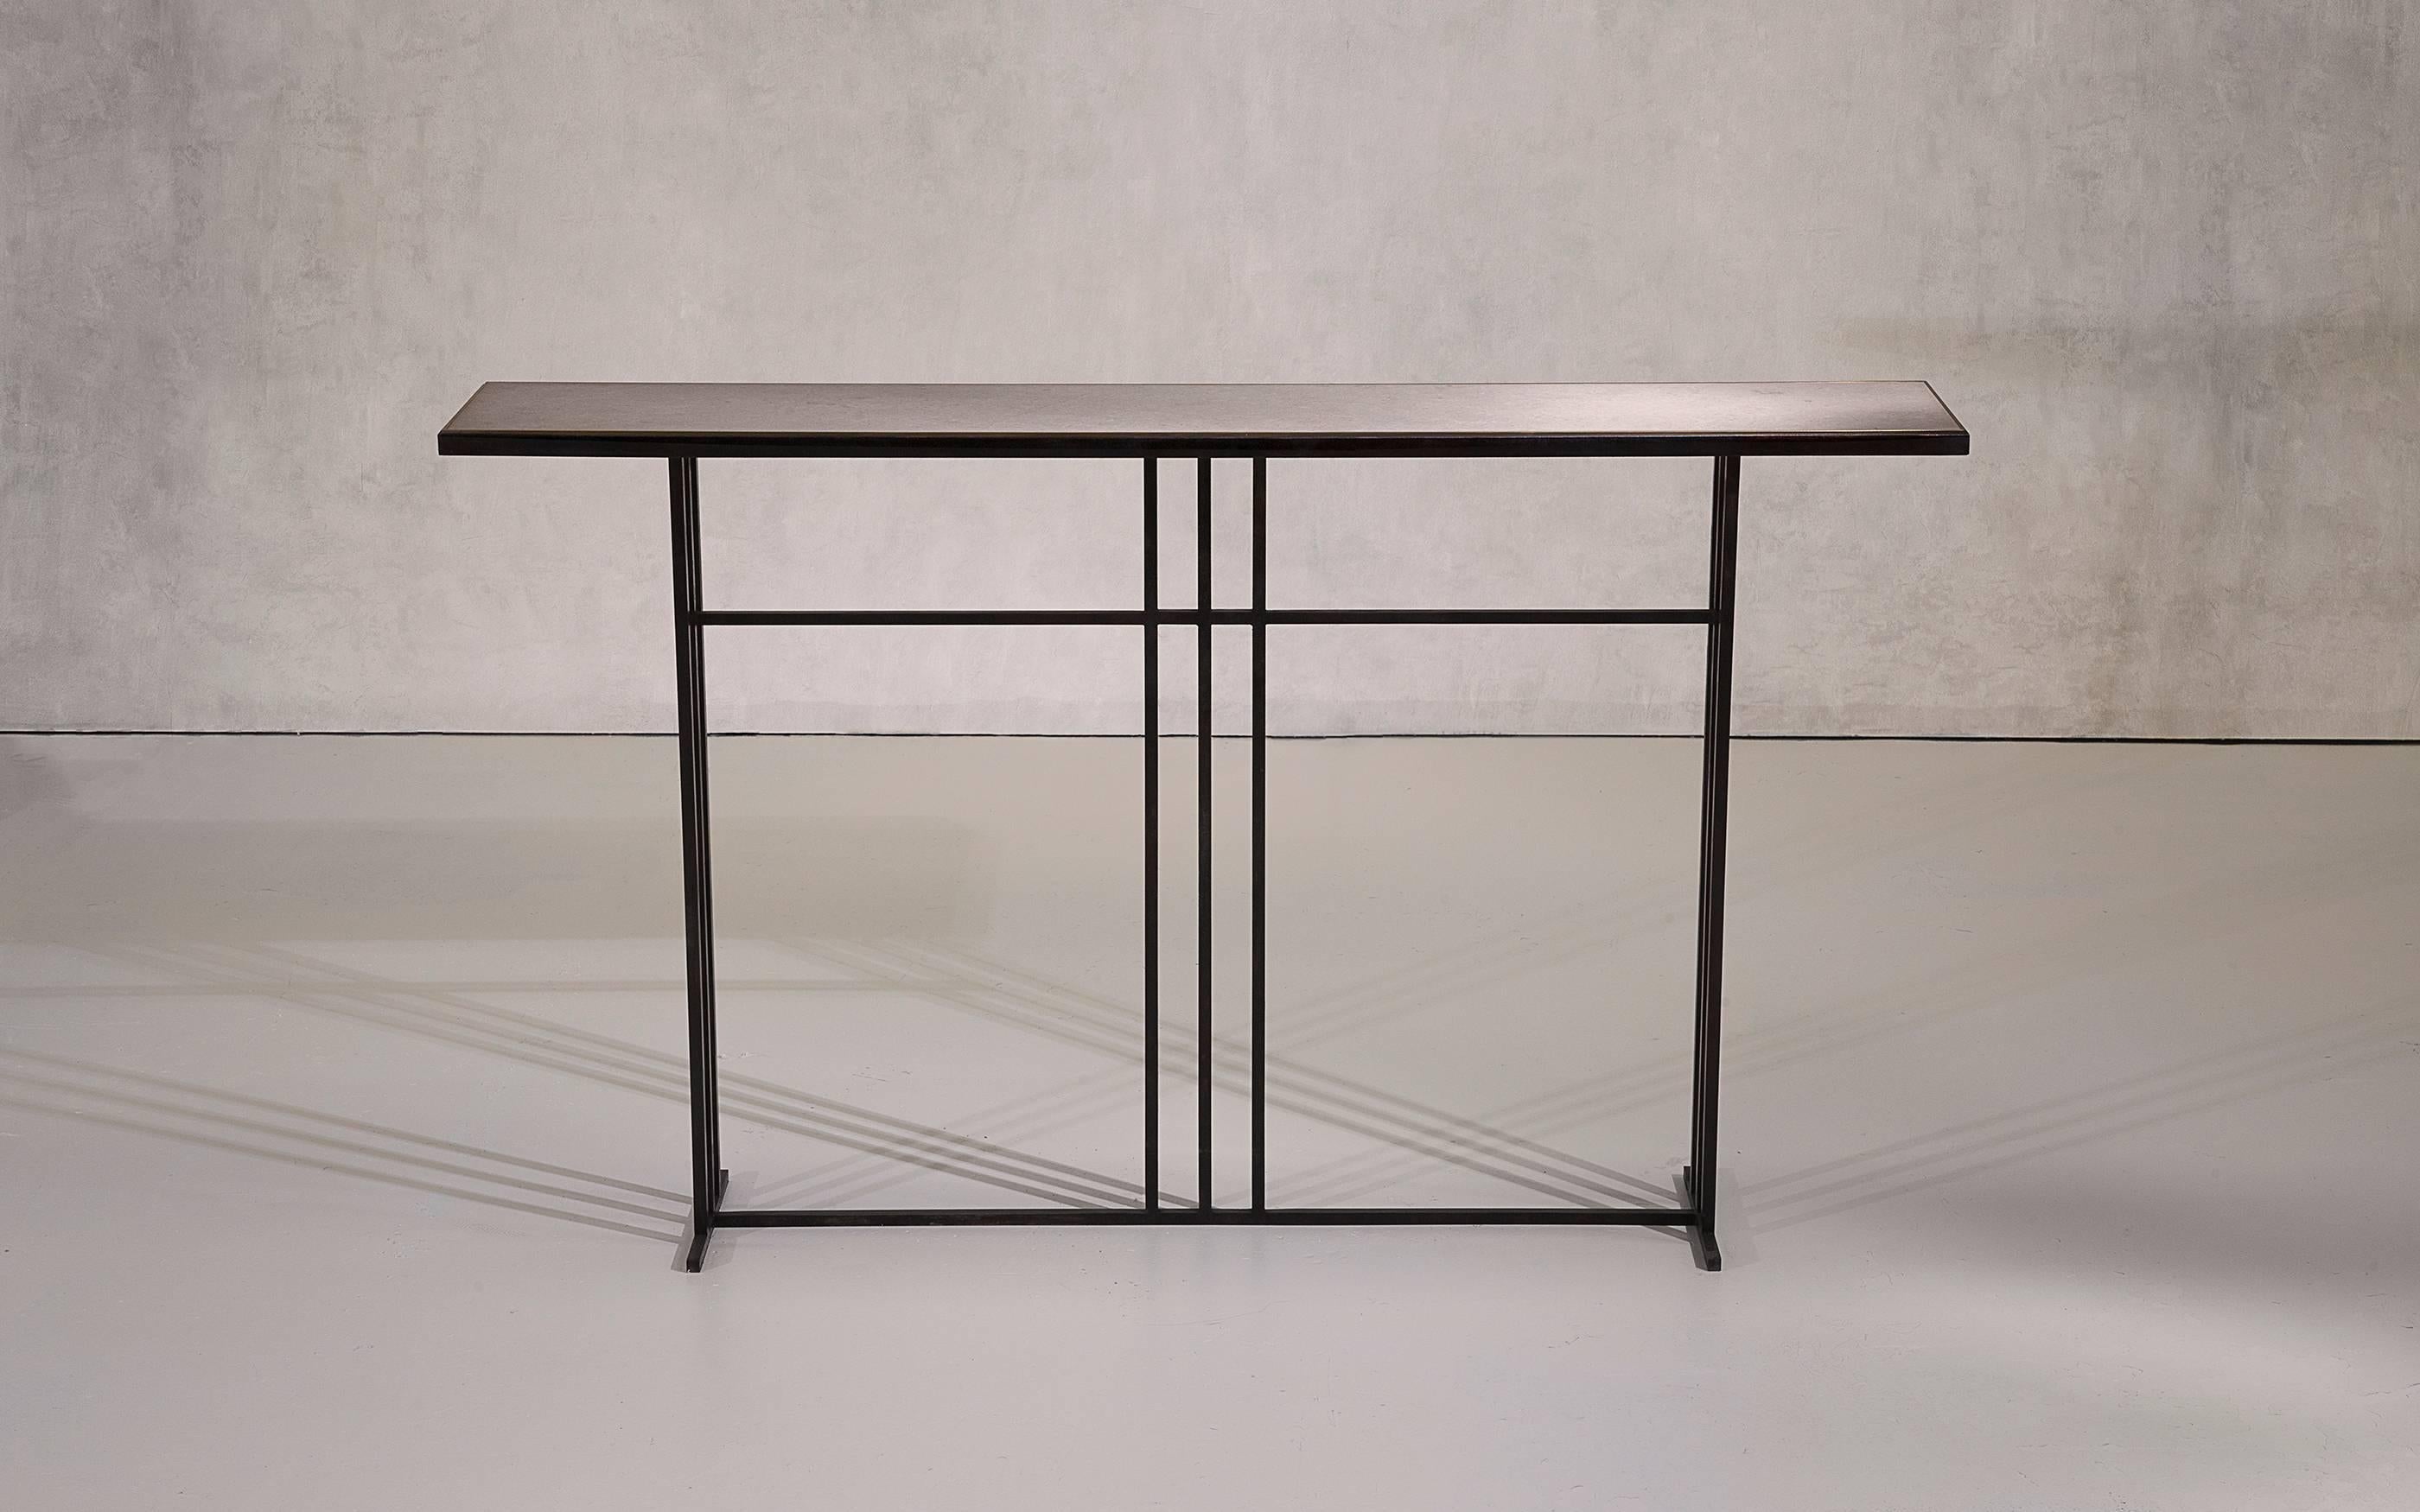 A console table in blackened steel and honed Cumbrian slate, with a polished brass trim. Hand crafted in the North to order. Custom sizes and finishes are available.

Measures: 180cm W x 35cm D x 80cm H. 
Custom sizes available.

Made to order